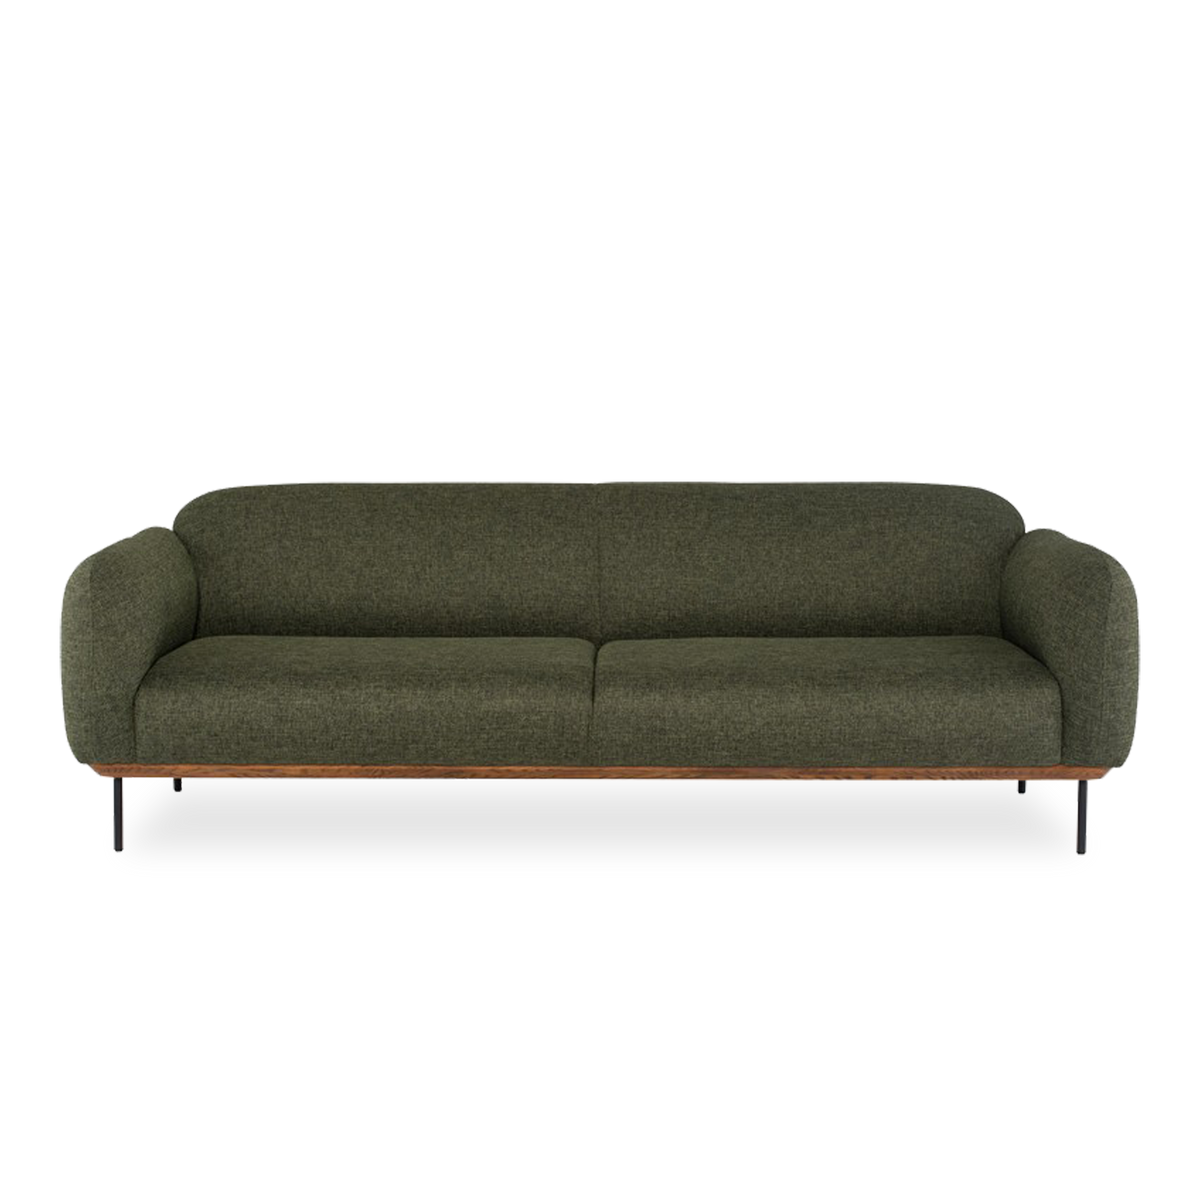 Mixing elements of contemporary and vintage styling, the Rubio Sofa is gracefully composed.